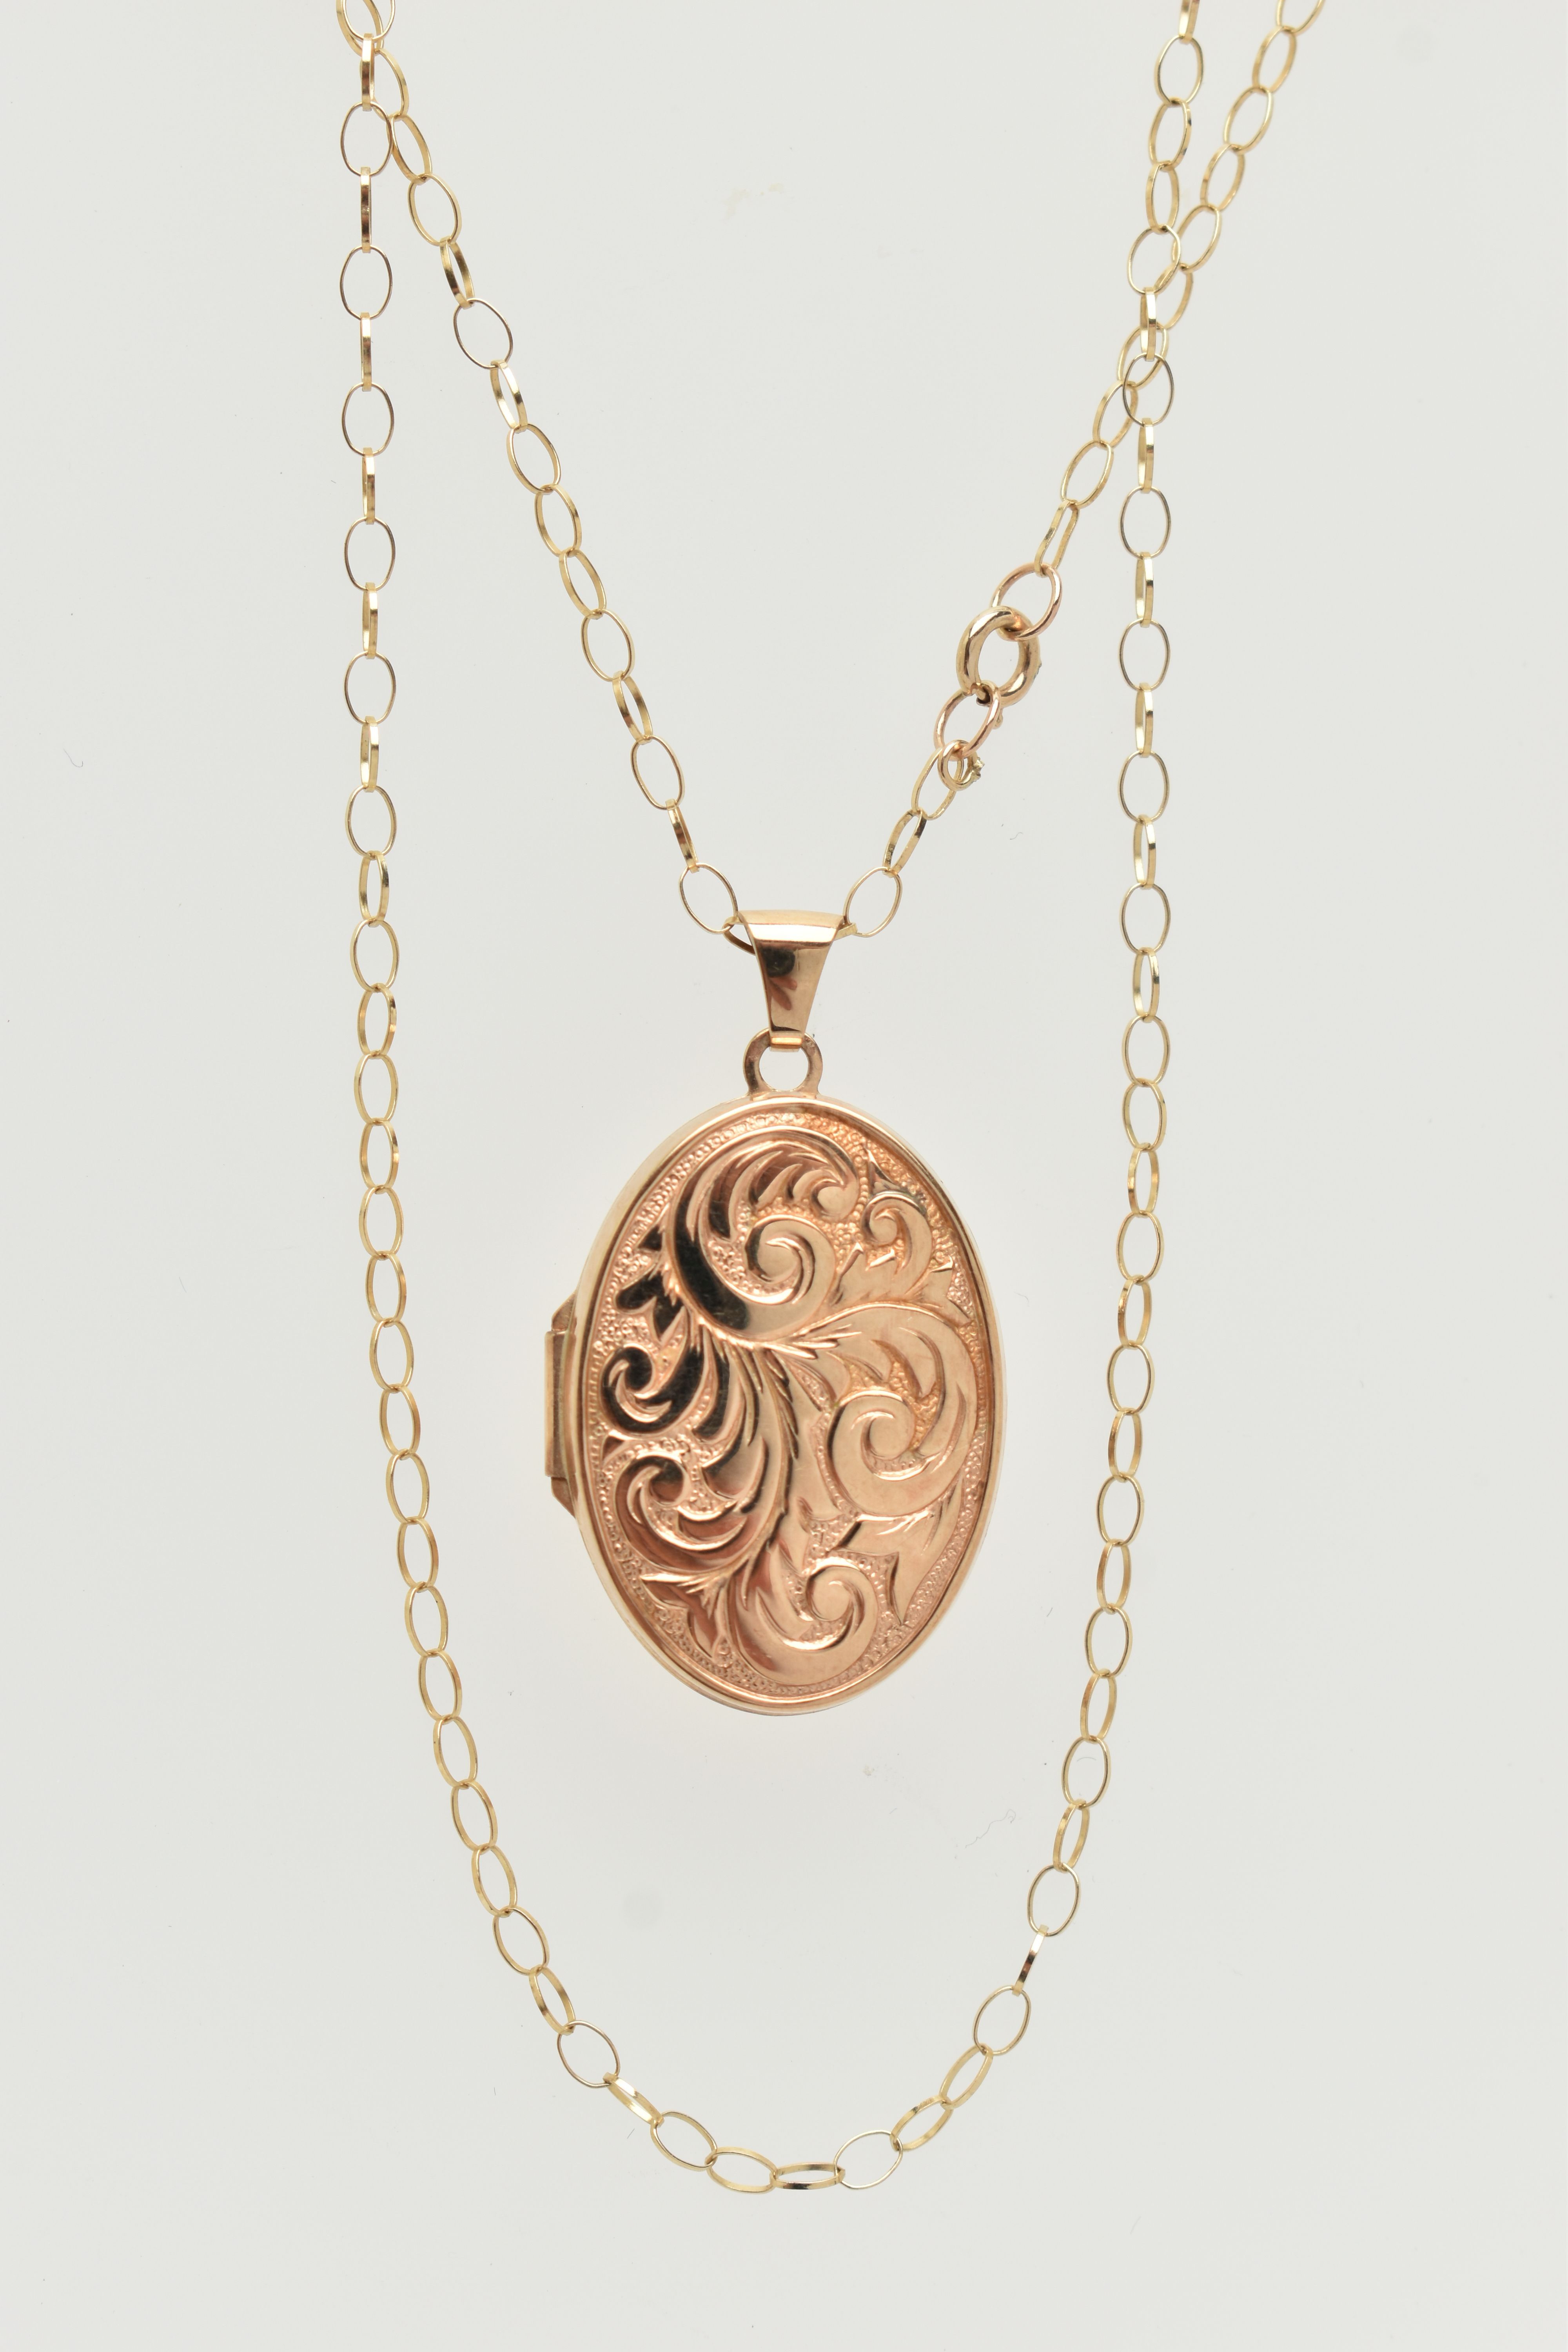 A 9CT GOLD LOCKET PENDANT AND CHAIN, oval floral pattern locket, opens to reveal two vacant